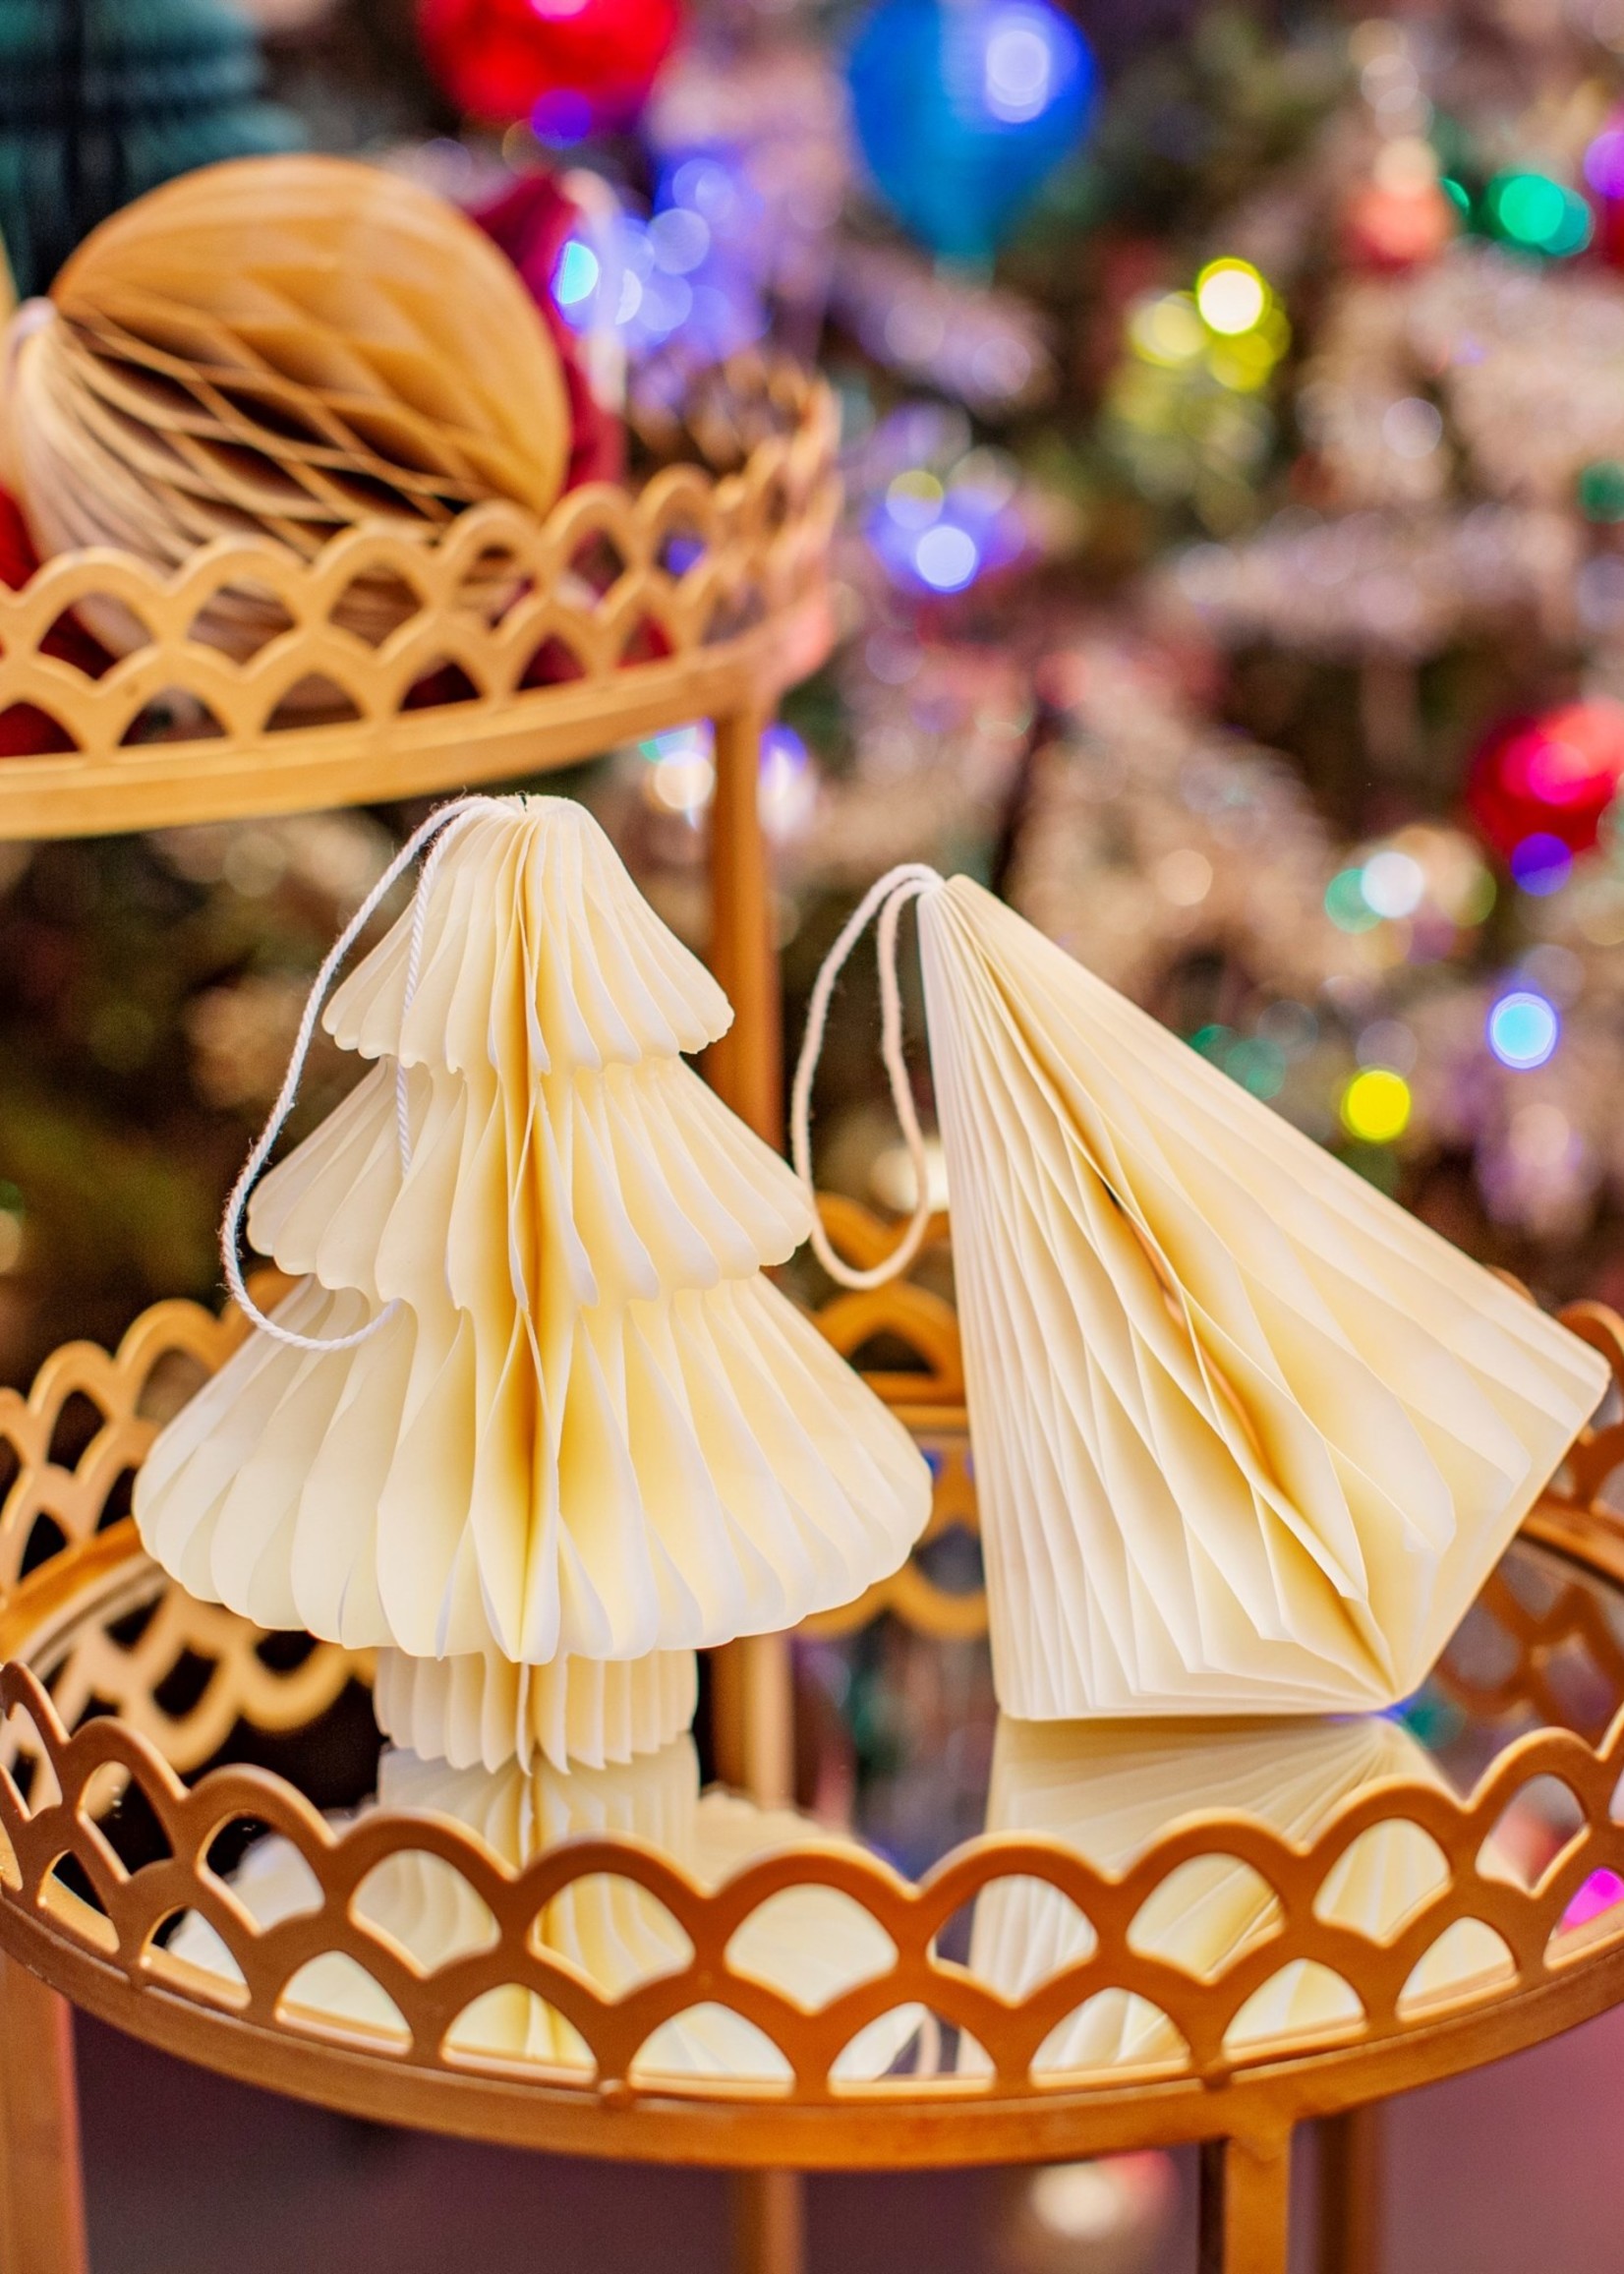 Sass & Belle Off White Tree or Diamond Paper Honeycomb Hanging Decoration (price is for one)